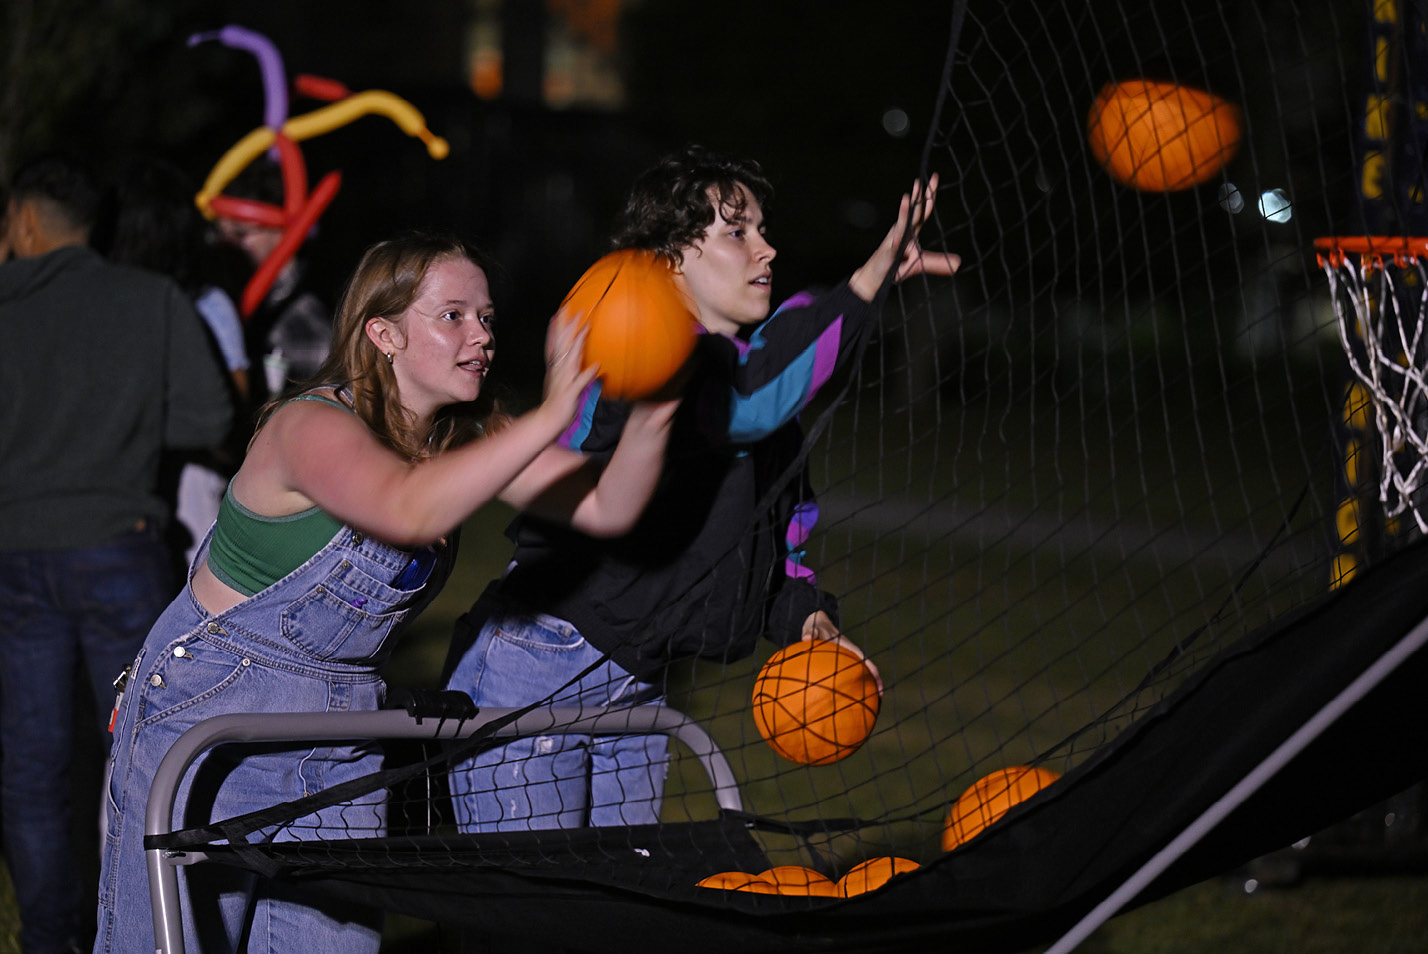 Students shoot basketballs on the midway at Fall carnival